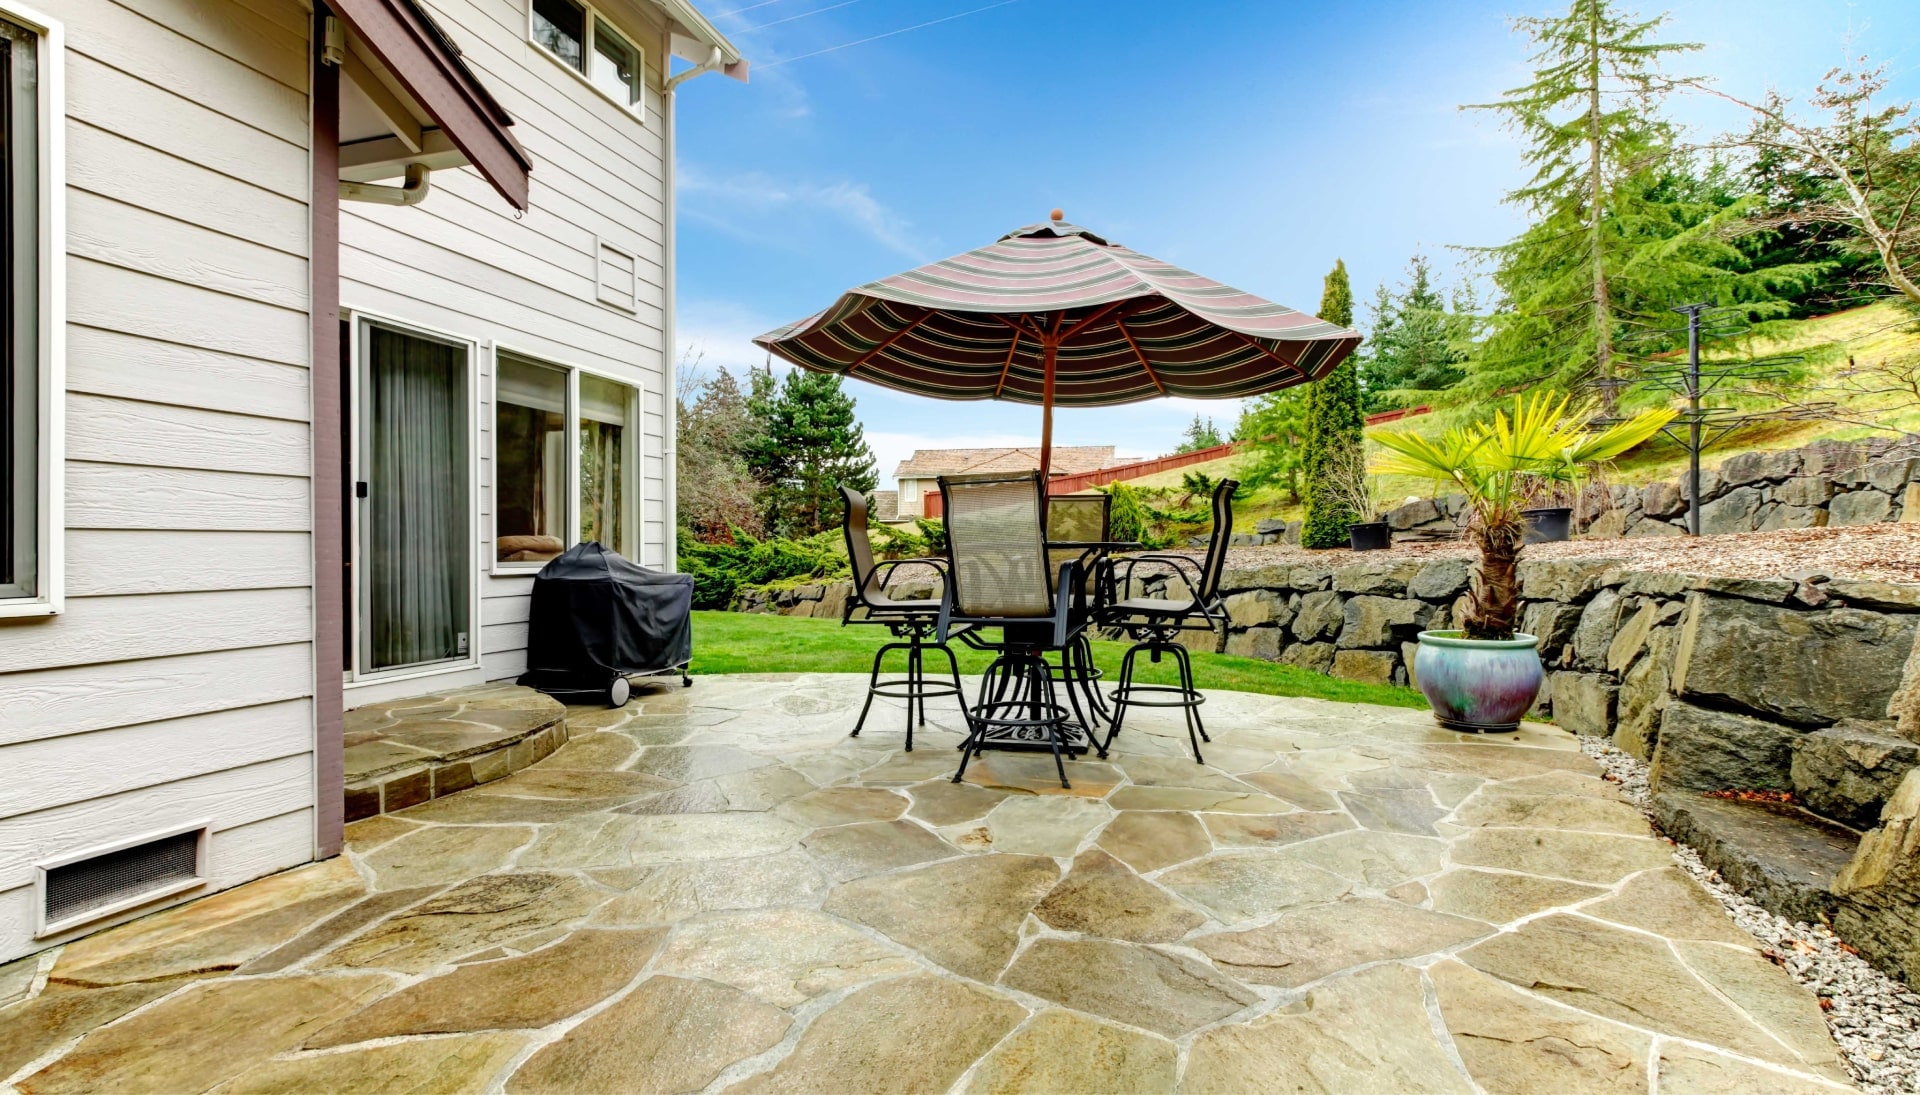 Beautifully Textured and Patterned Concrete Patios in Everett, Washington